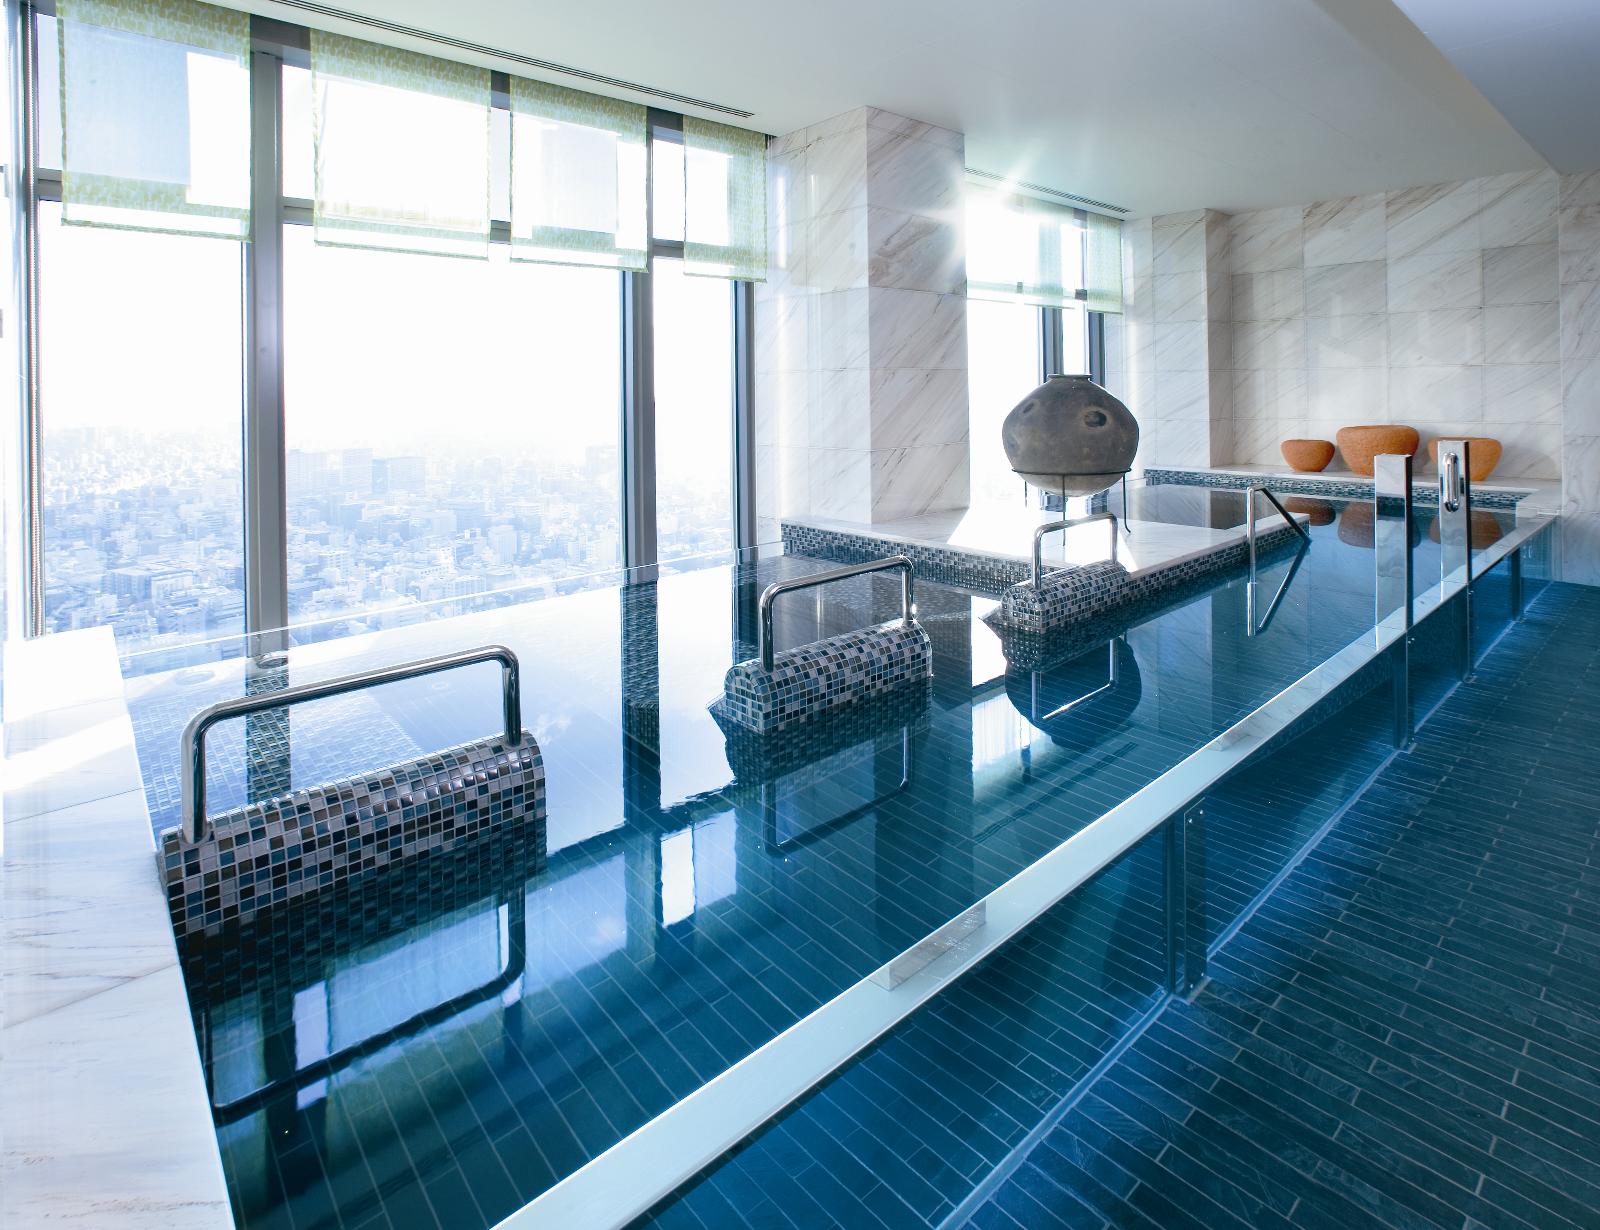 Pool with a view - Mandarin Oriental Tokyo 